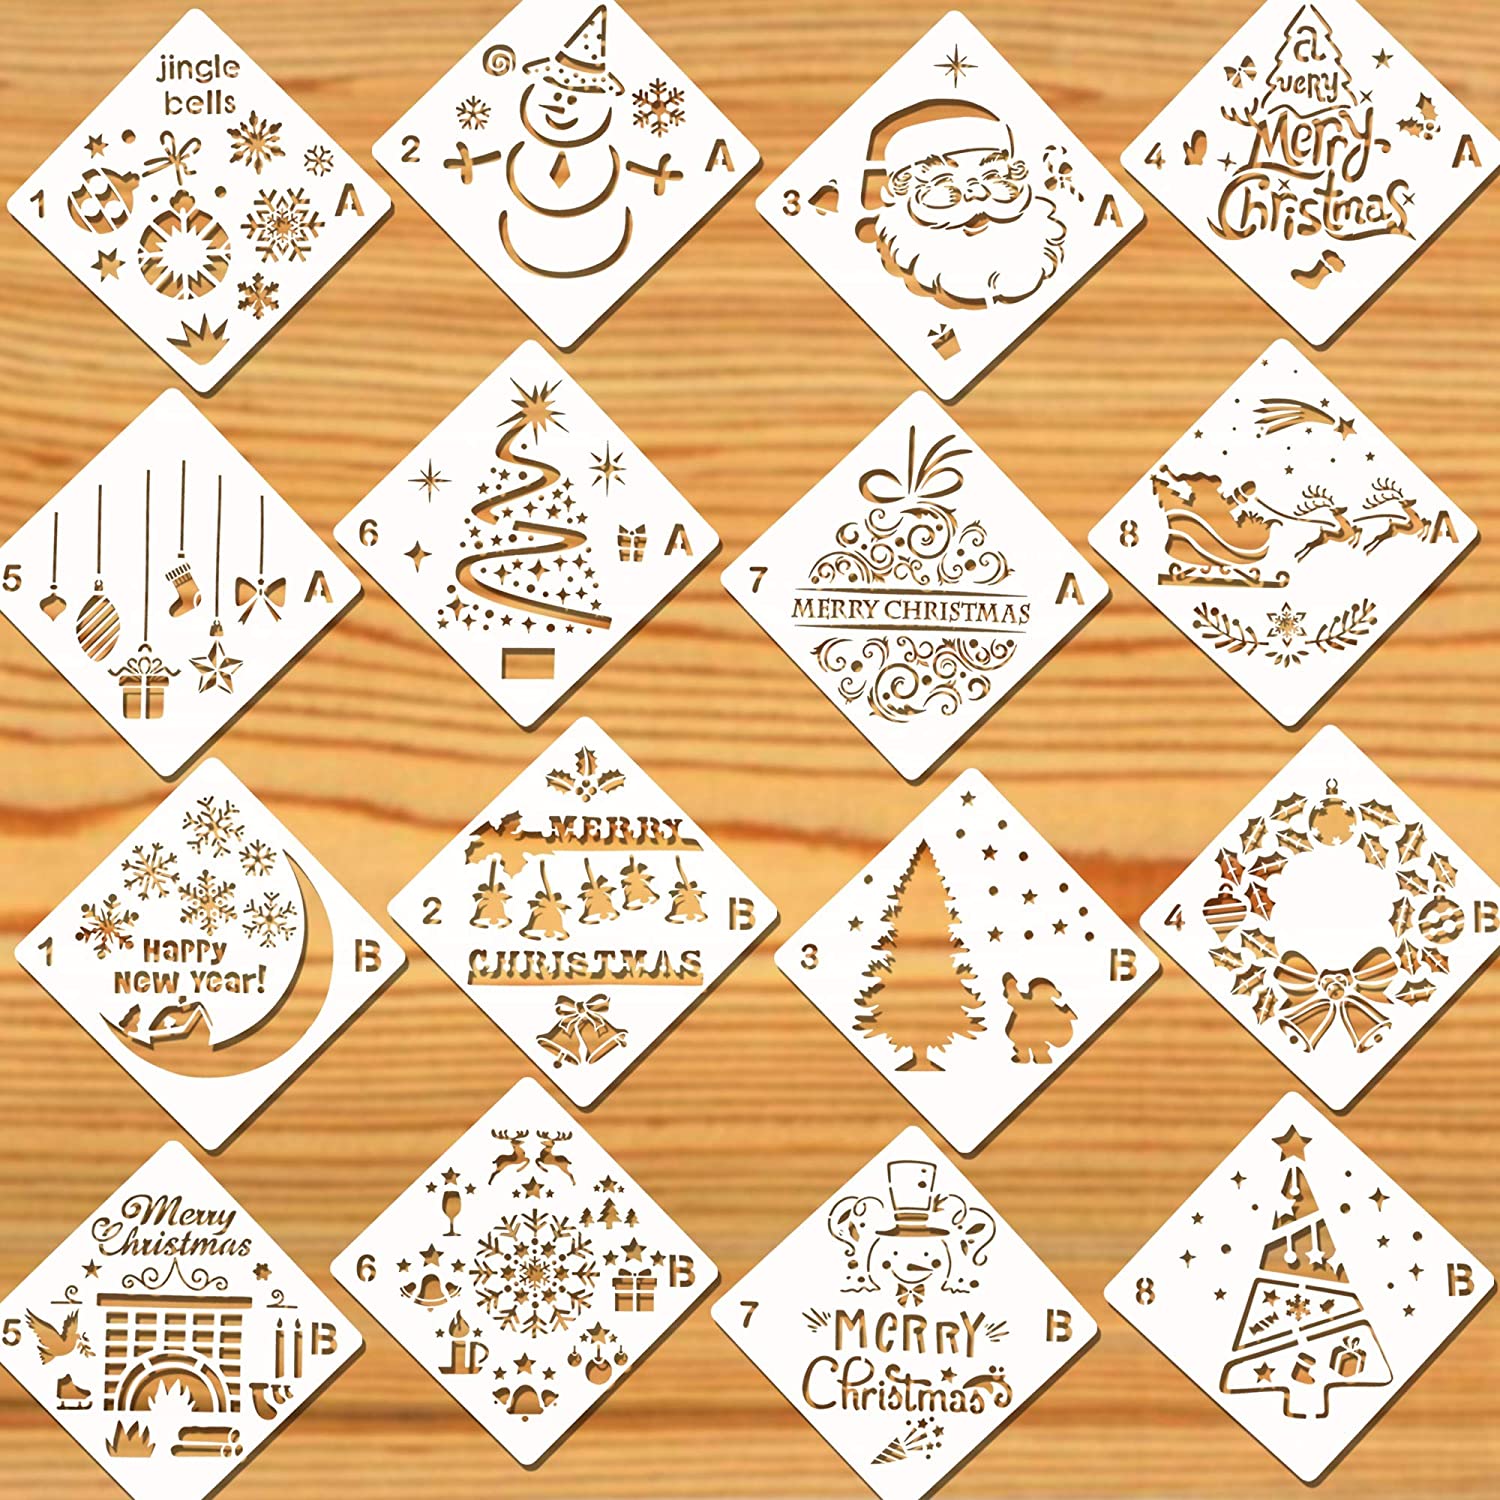 Christmas Stencils 4 Inch Round Merry Christmas Stencils for Painting on Wood Reusable Xmas Christmas Ornaments Stencil for Wall Glass Cards Scrapbook Journal Cookie 